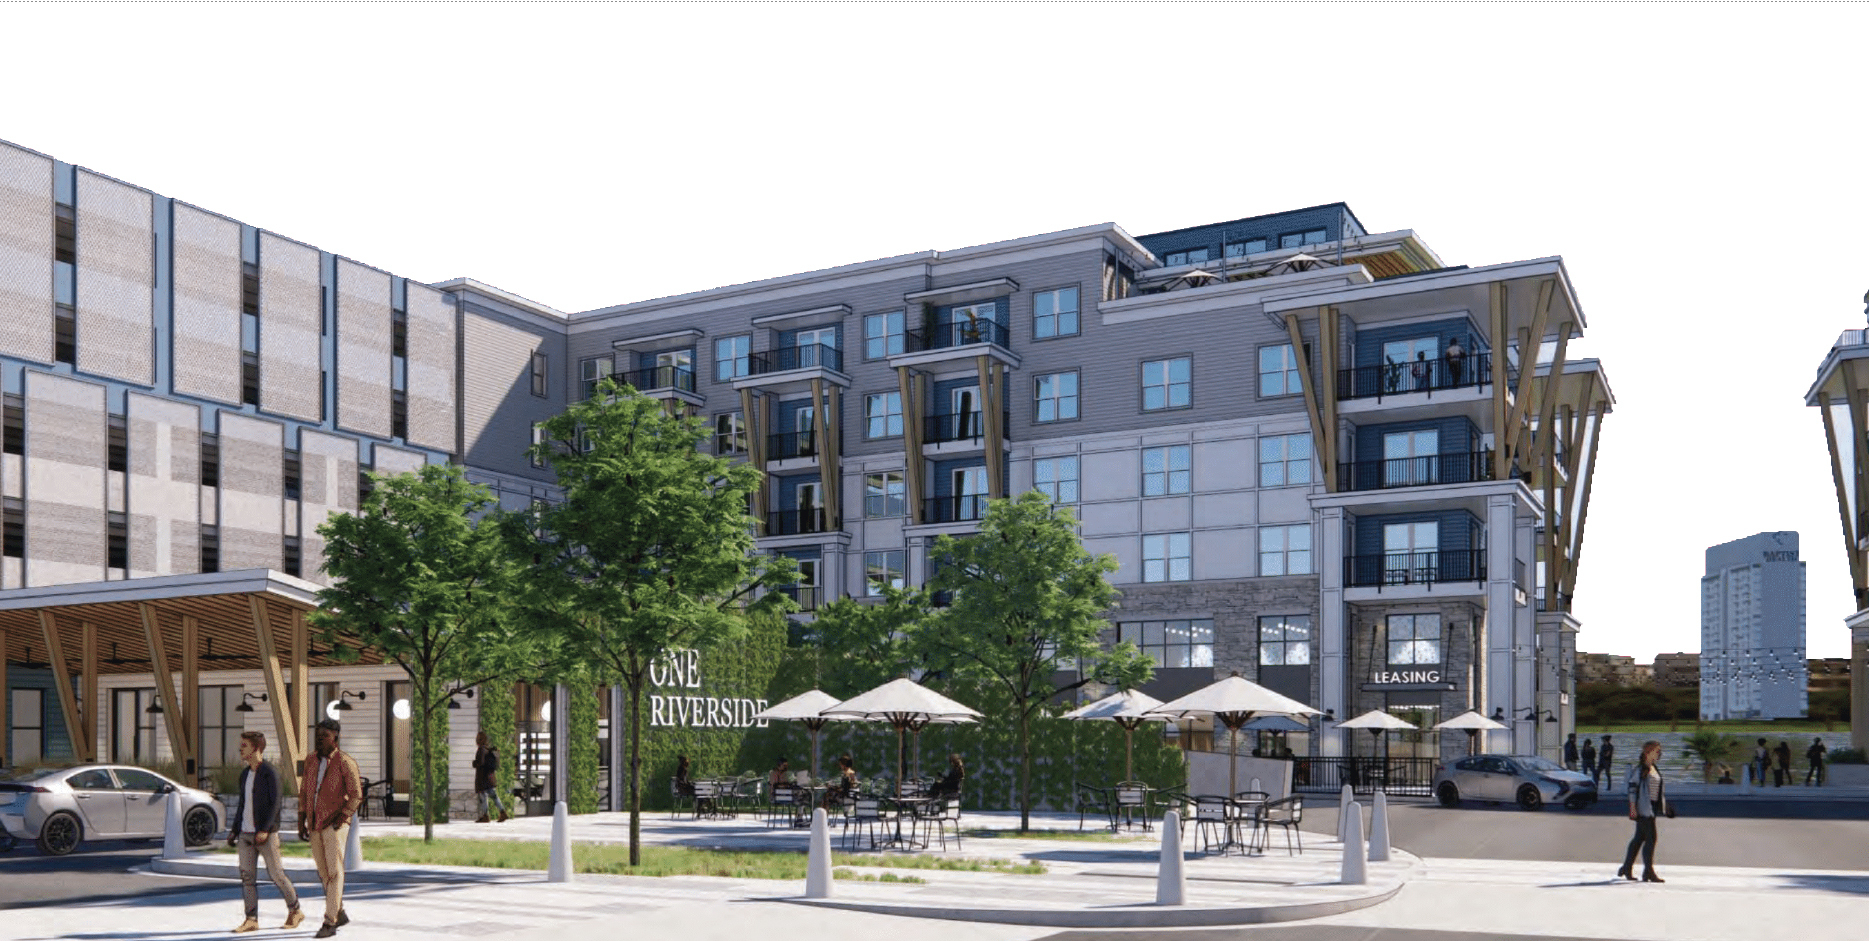 One Riverside is a mix of apartments and retail.